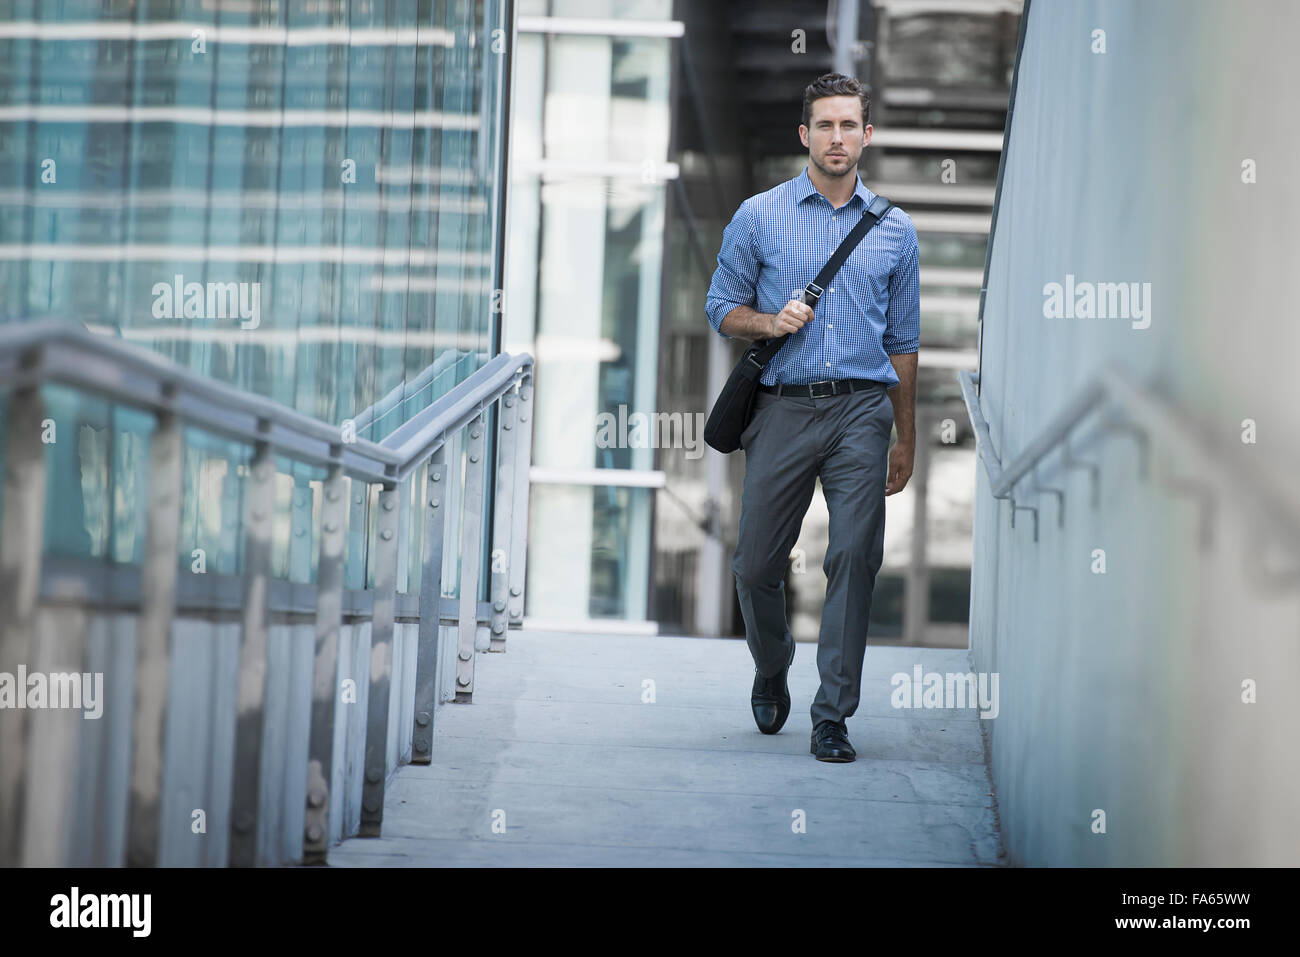 A man carrying a computer bag with a strap across his chest on along a city  walkway Stock Photo - Alamy